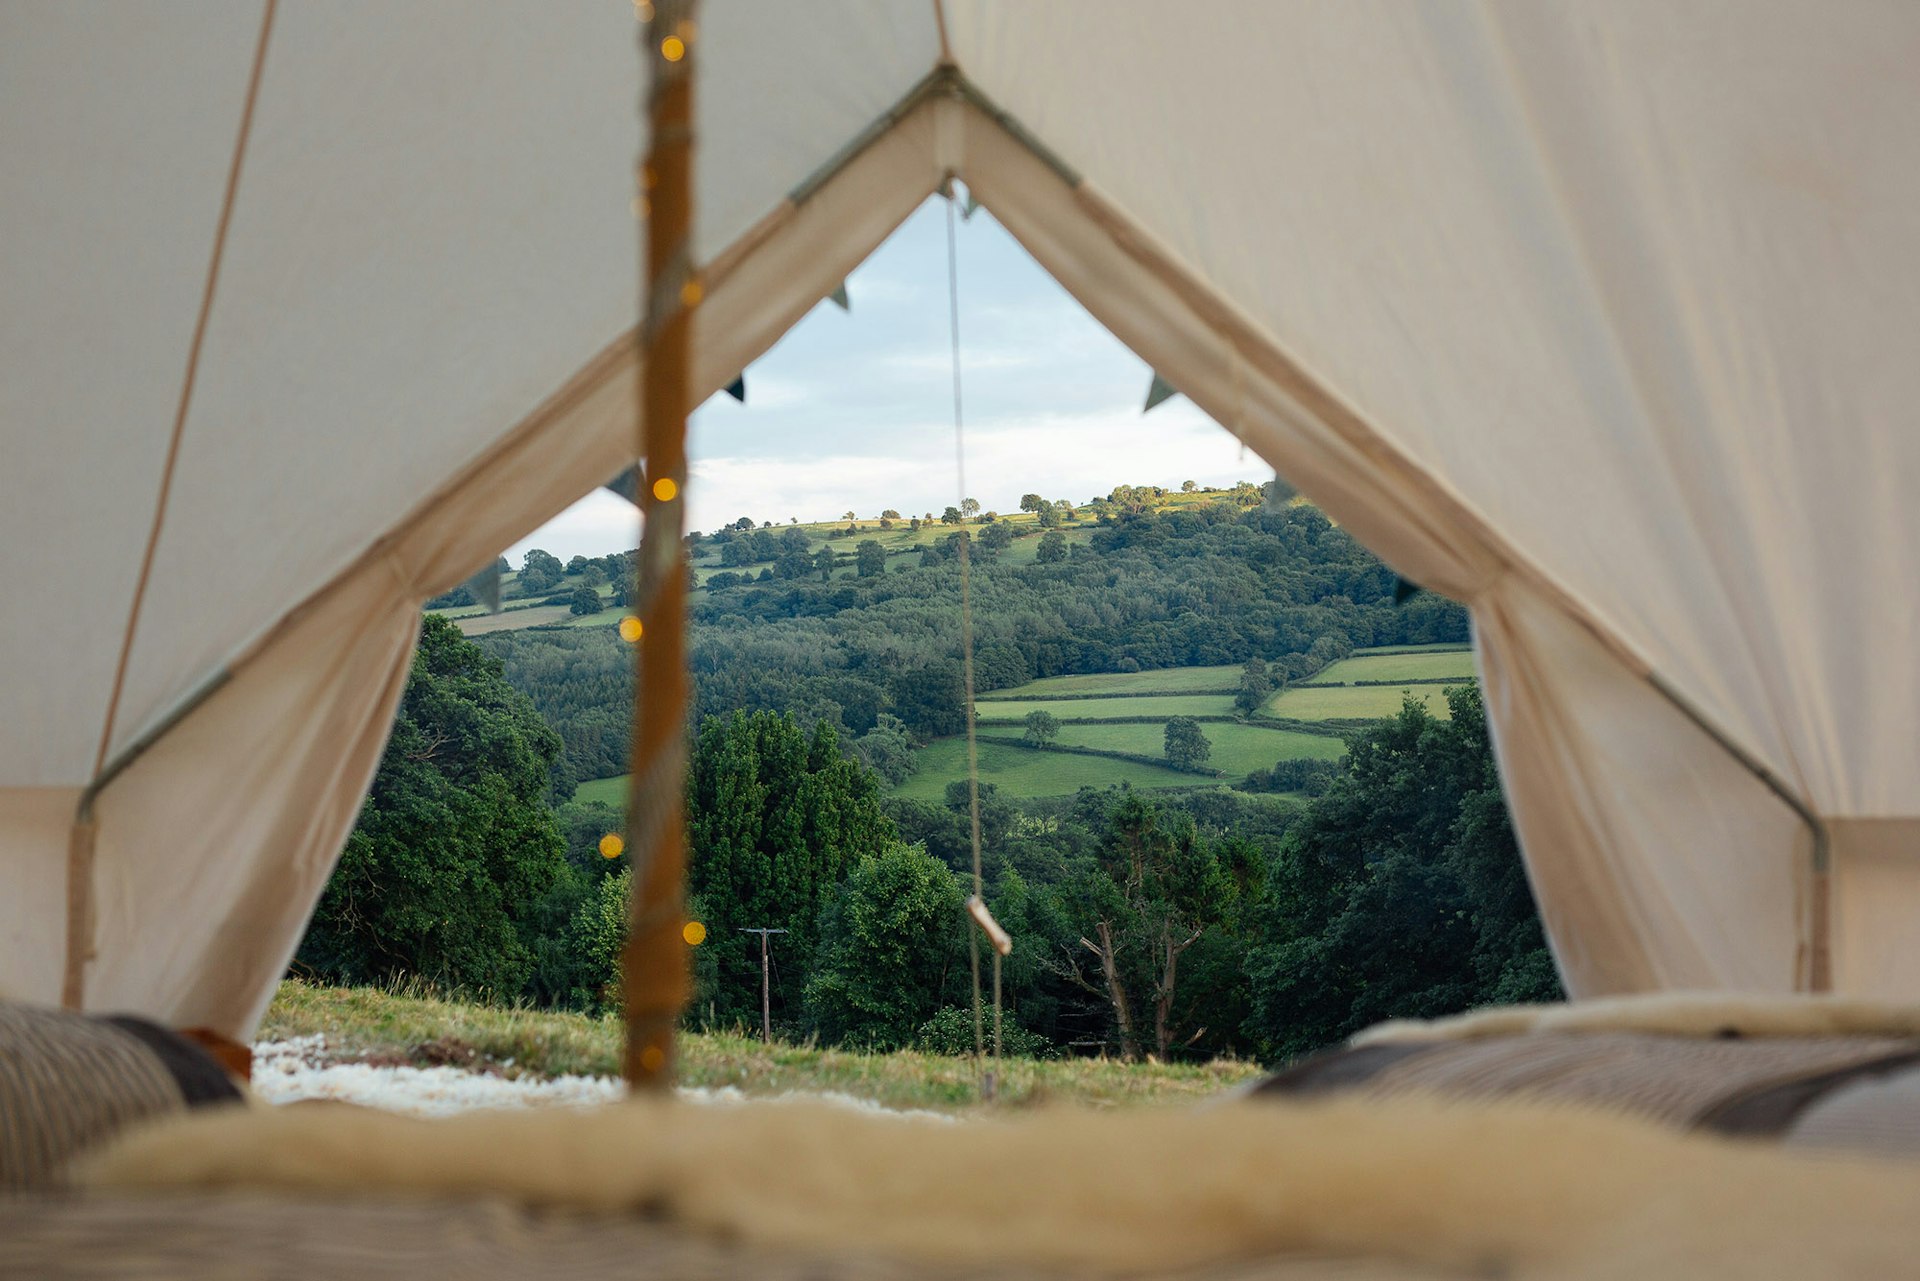 Festival tents reused by UK glamping company